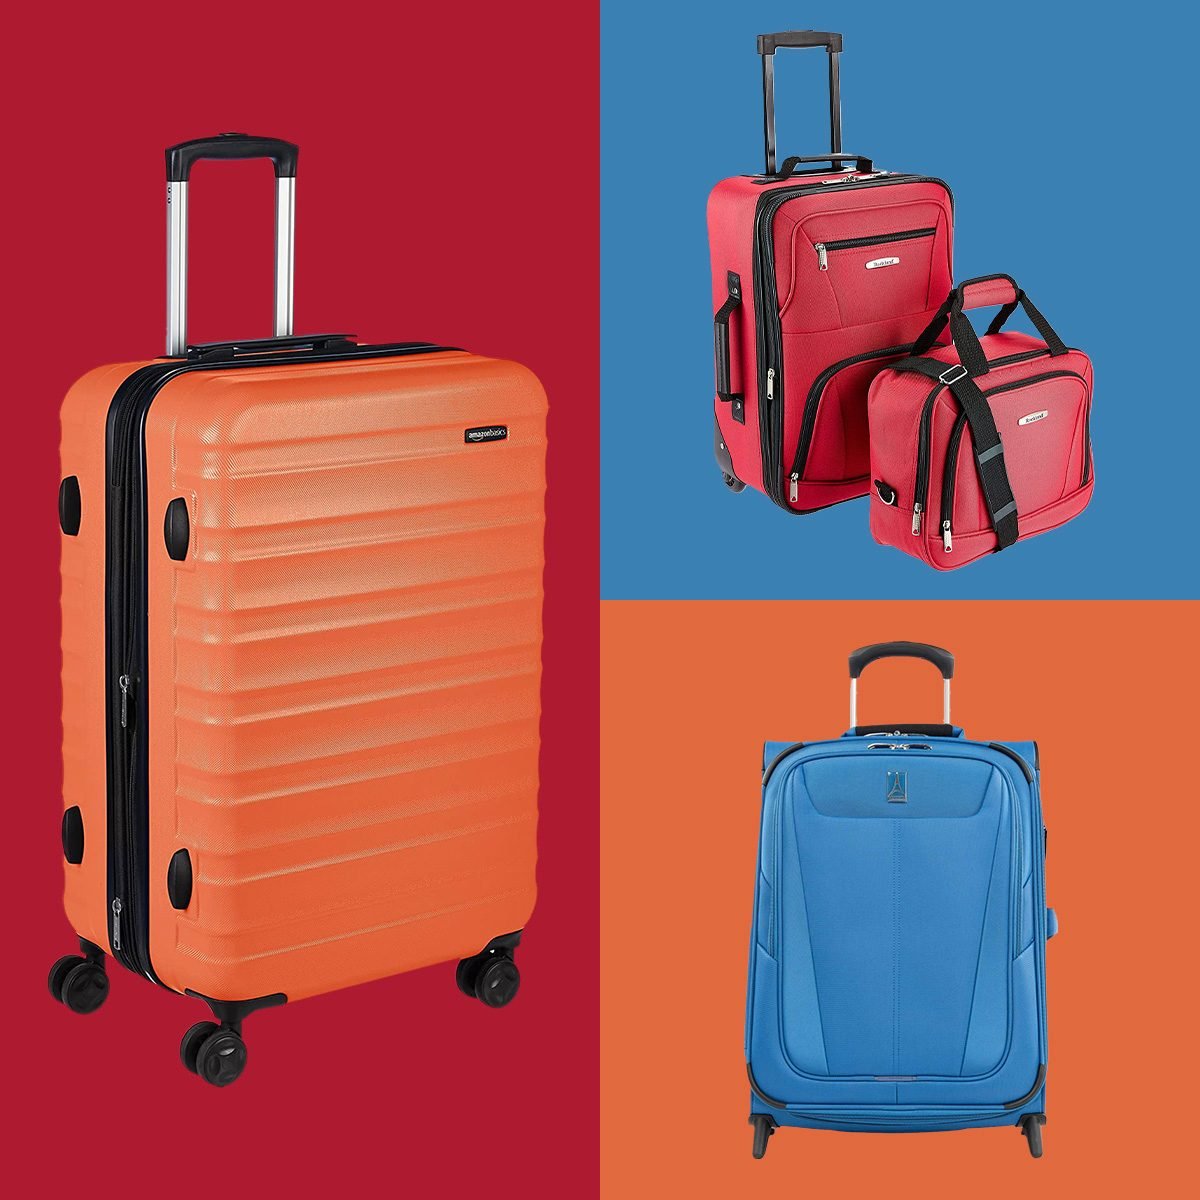 https://www.rd.com/wp-content/uploads/2022/10/The-Best-Affordable-Luggage-to-Help-You-Travel-for-Cheap-FT_v2.jpg